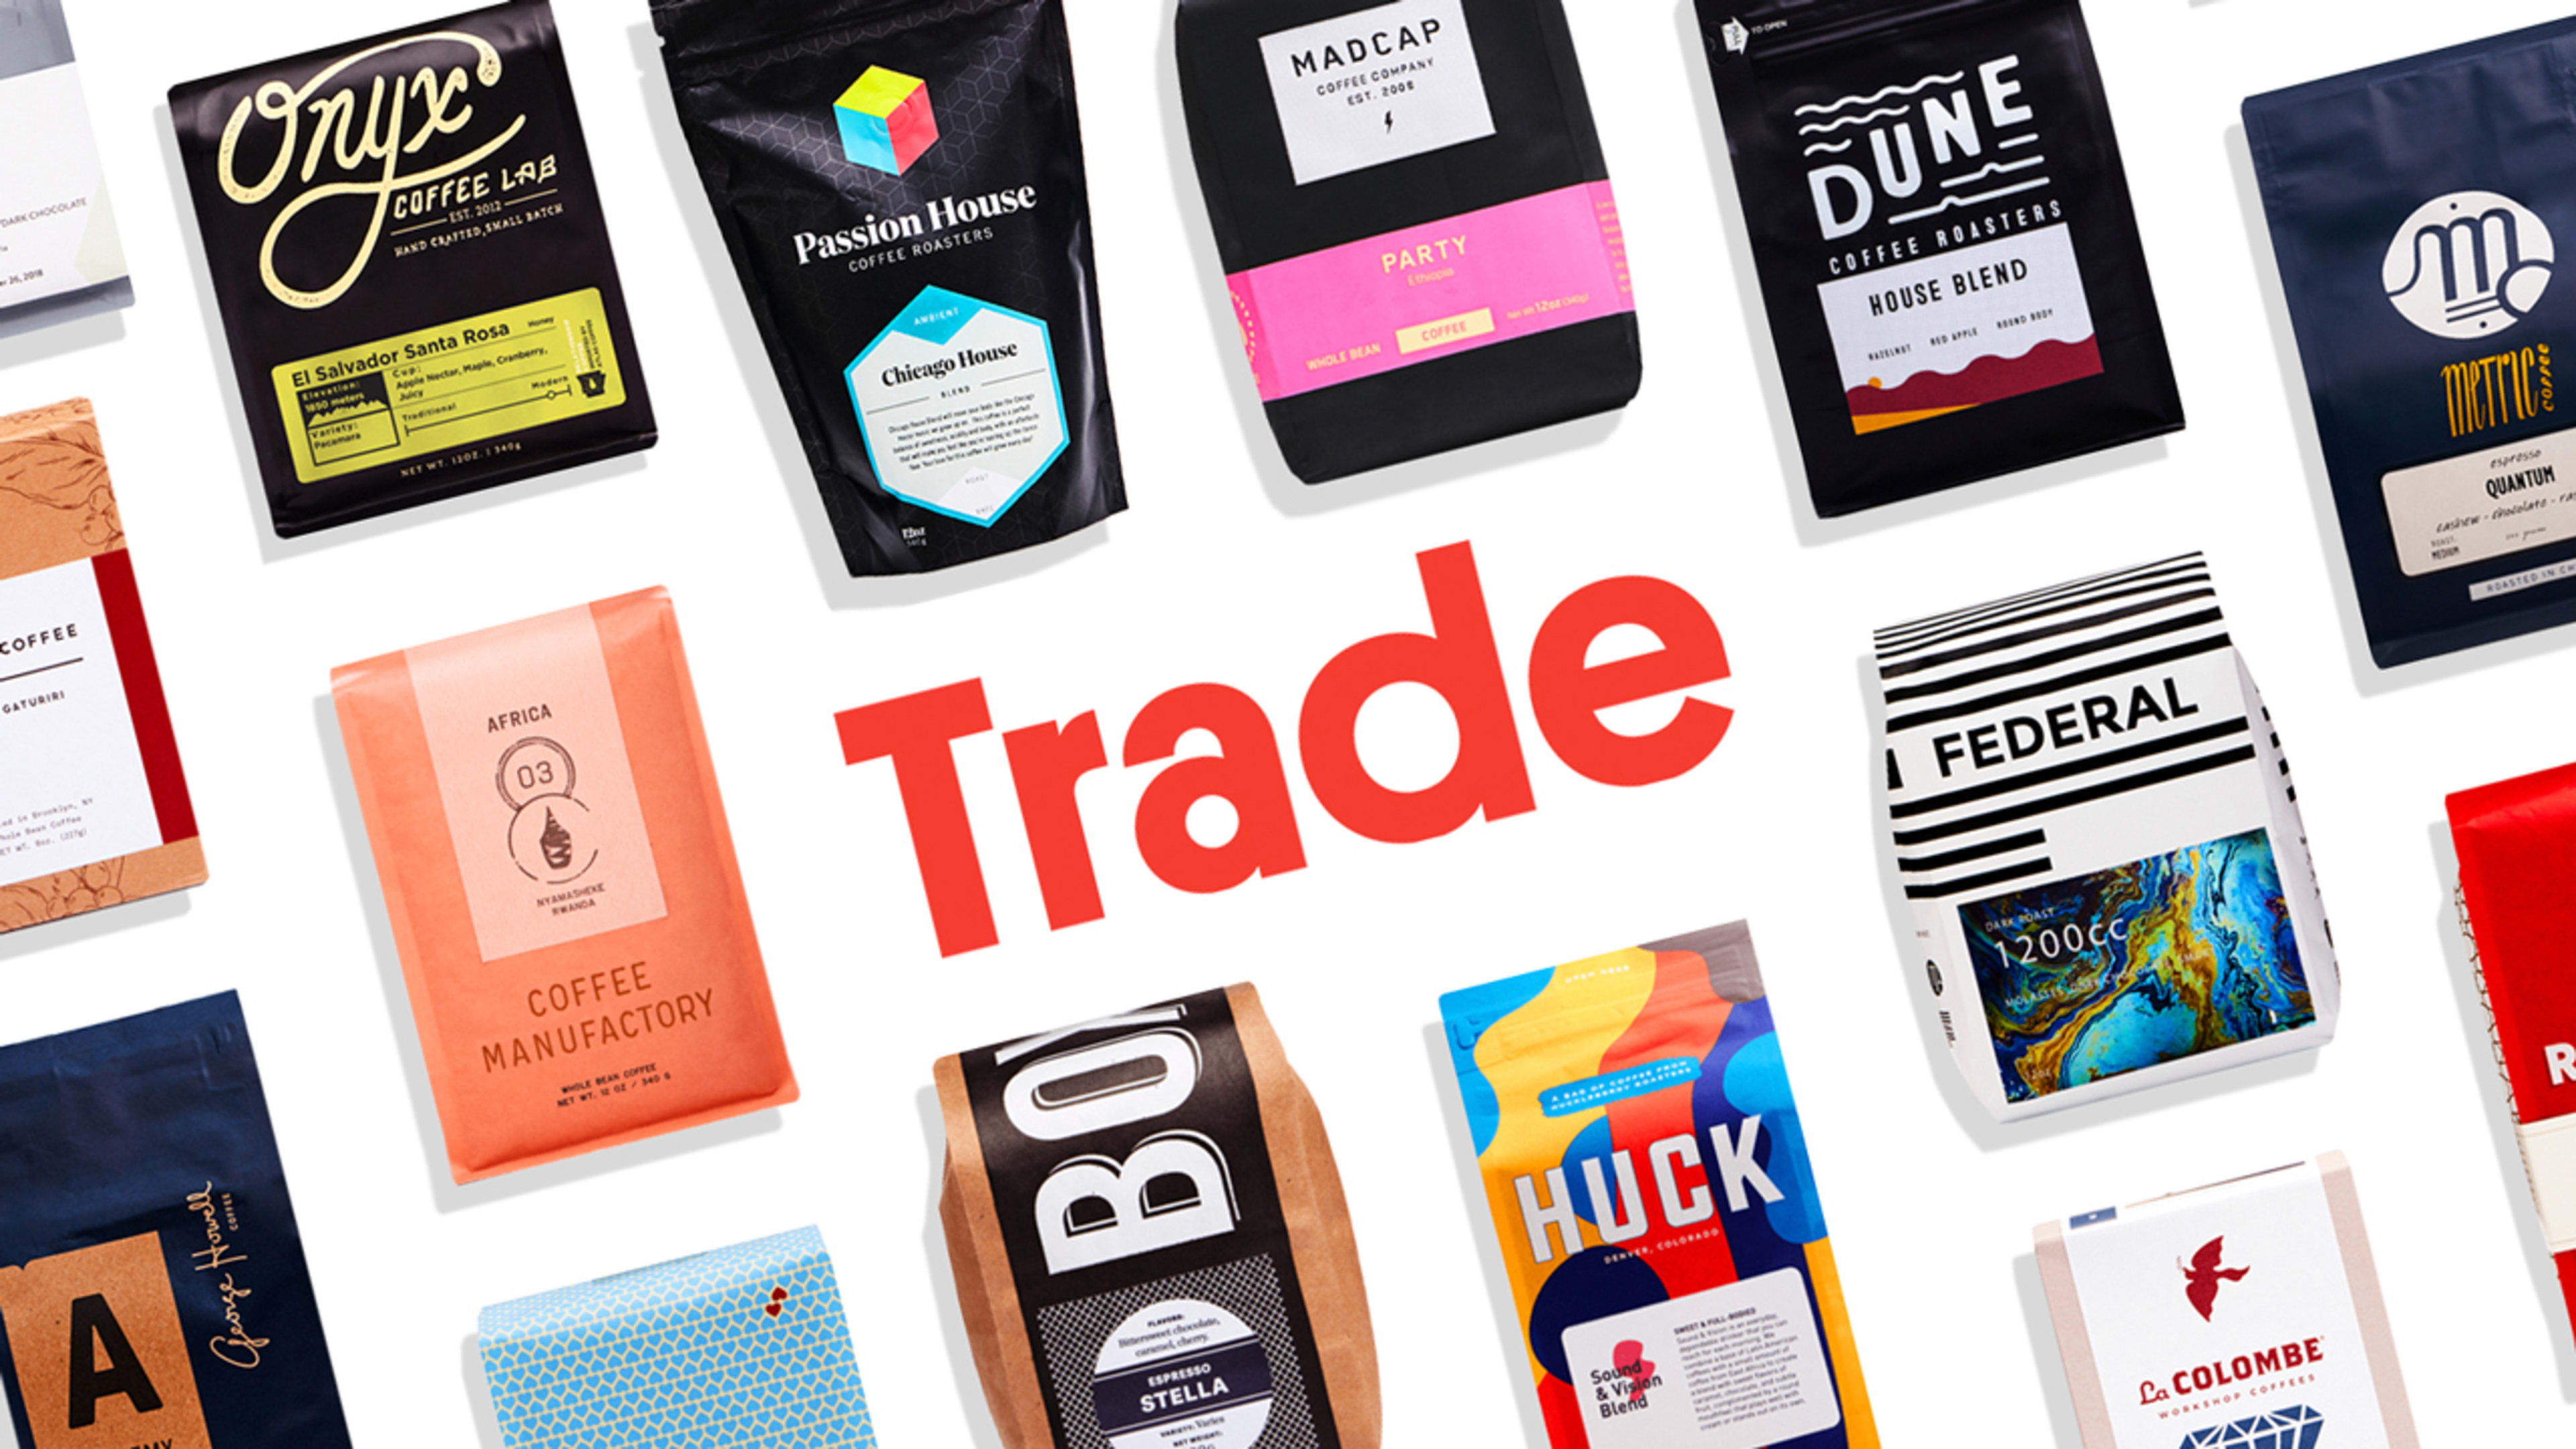 The Tinder for coffee wants to hook you on specialty roasts with a subscription